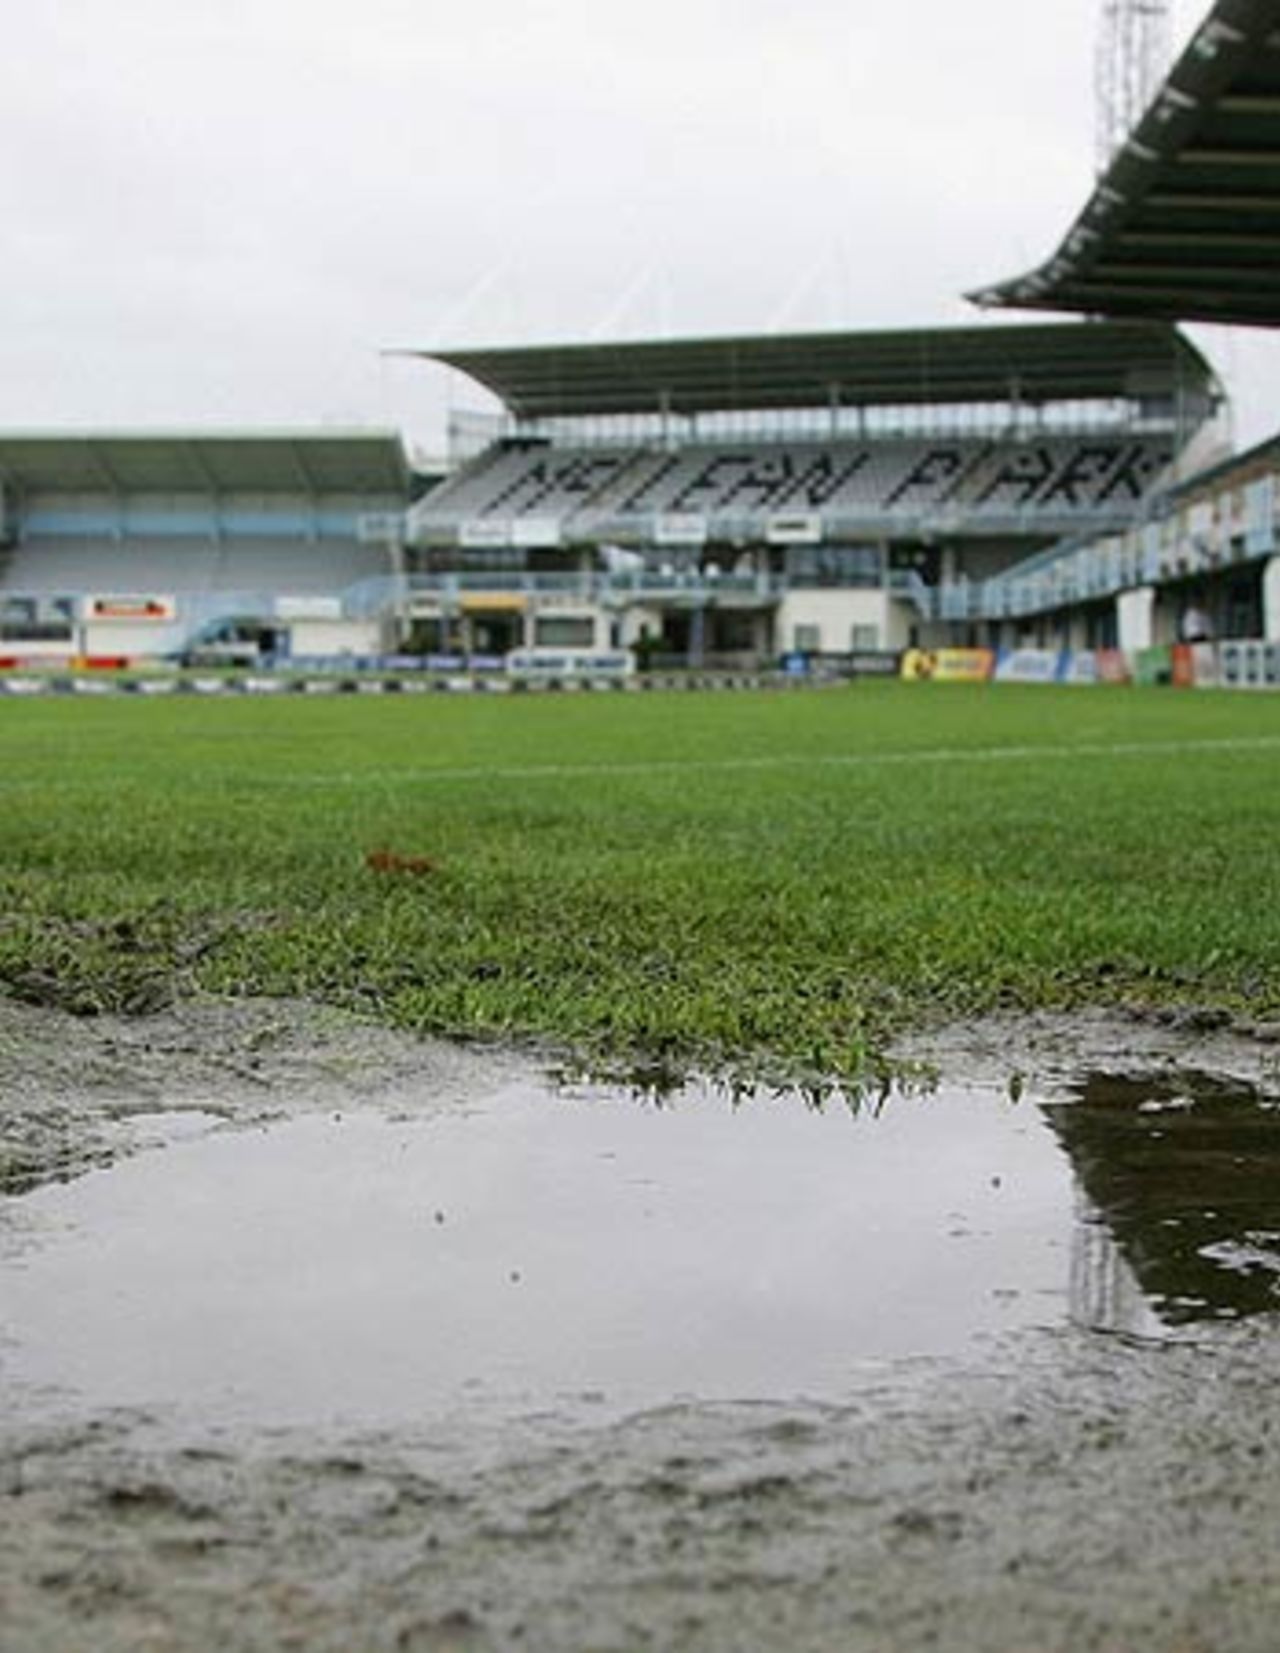 The water-logged ground at Napier, New Zealand v West Indies, 3rd Test, Napier, 3rd day, March 27, 2006